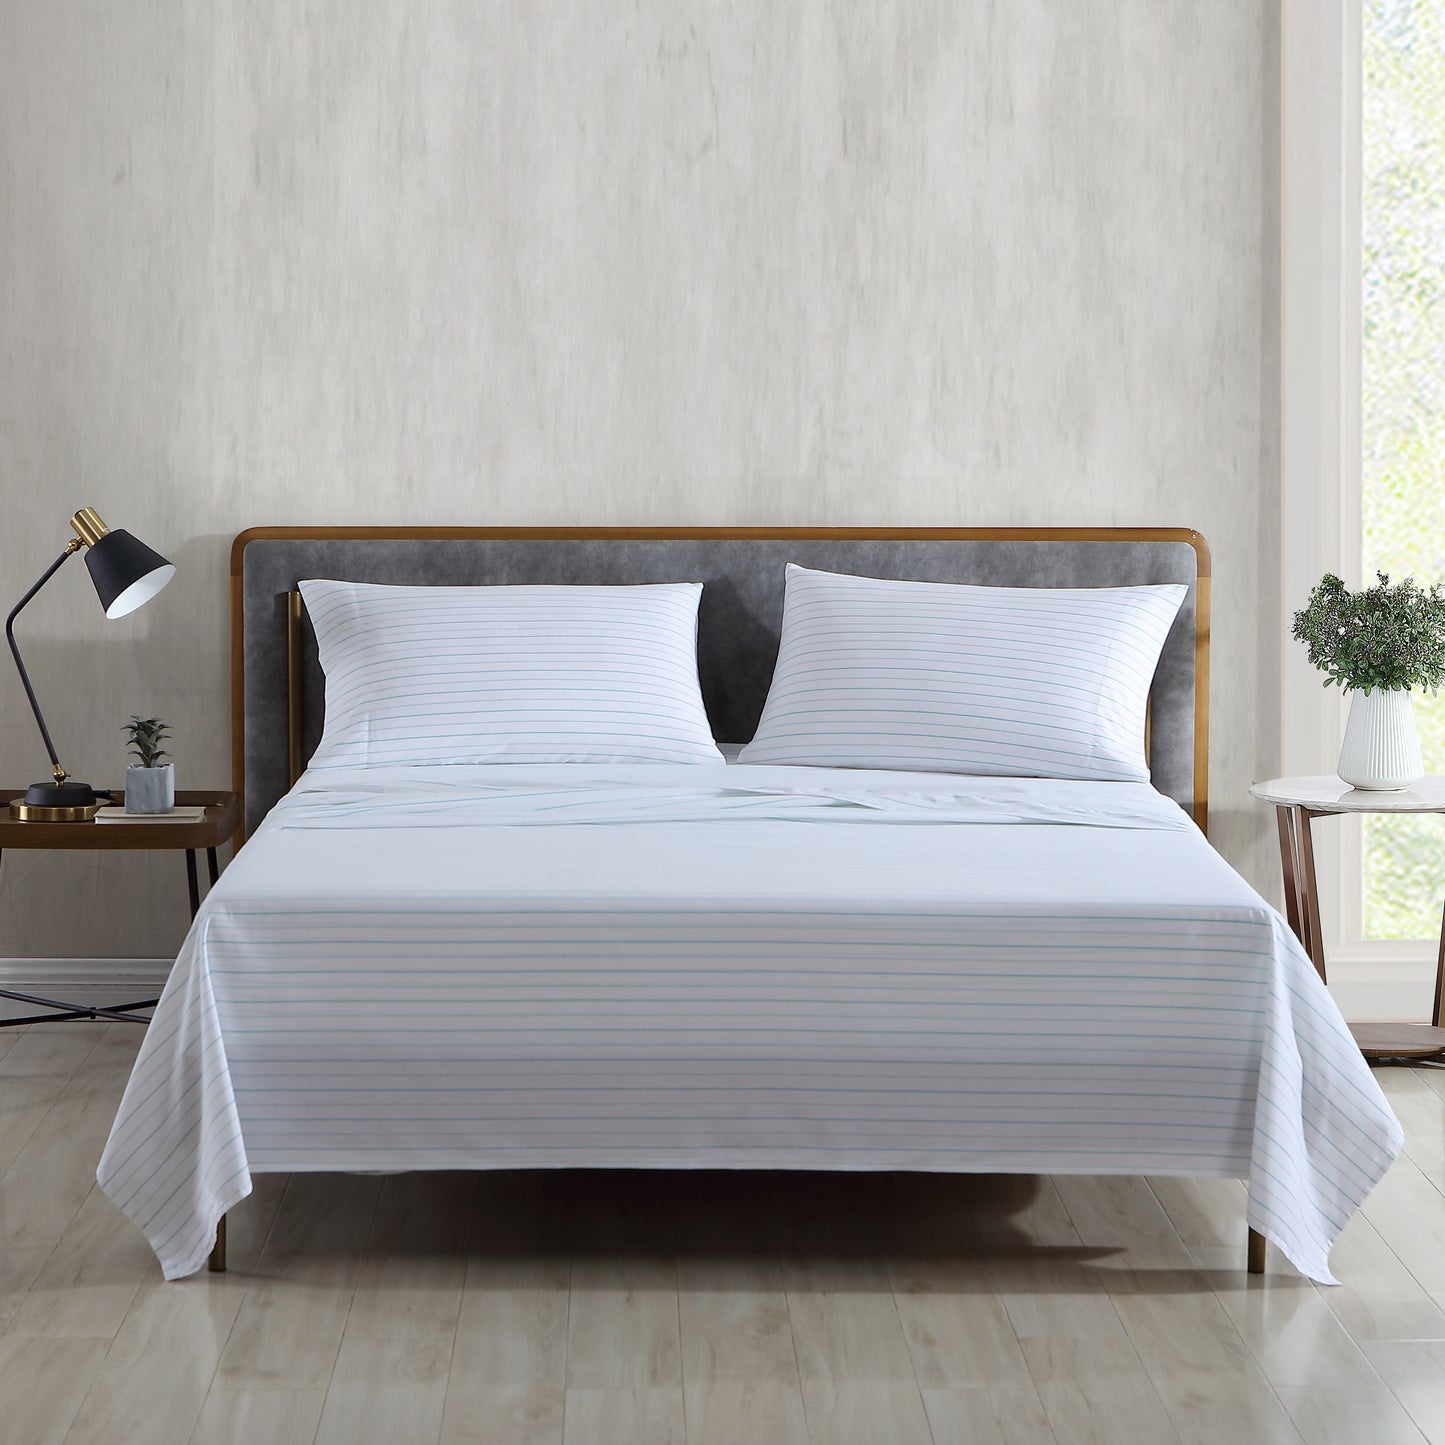 Freshee Striped Sheet Set Powered by Intellifresh Antimicrobial Technology